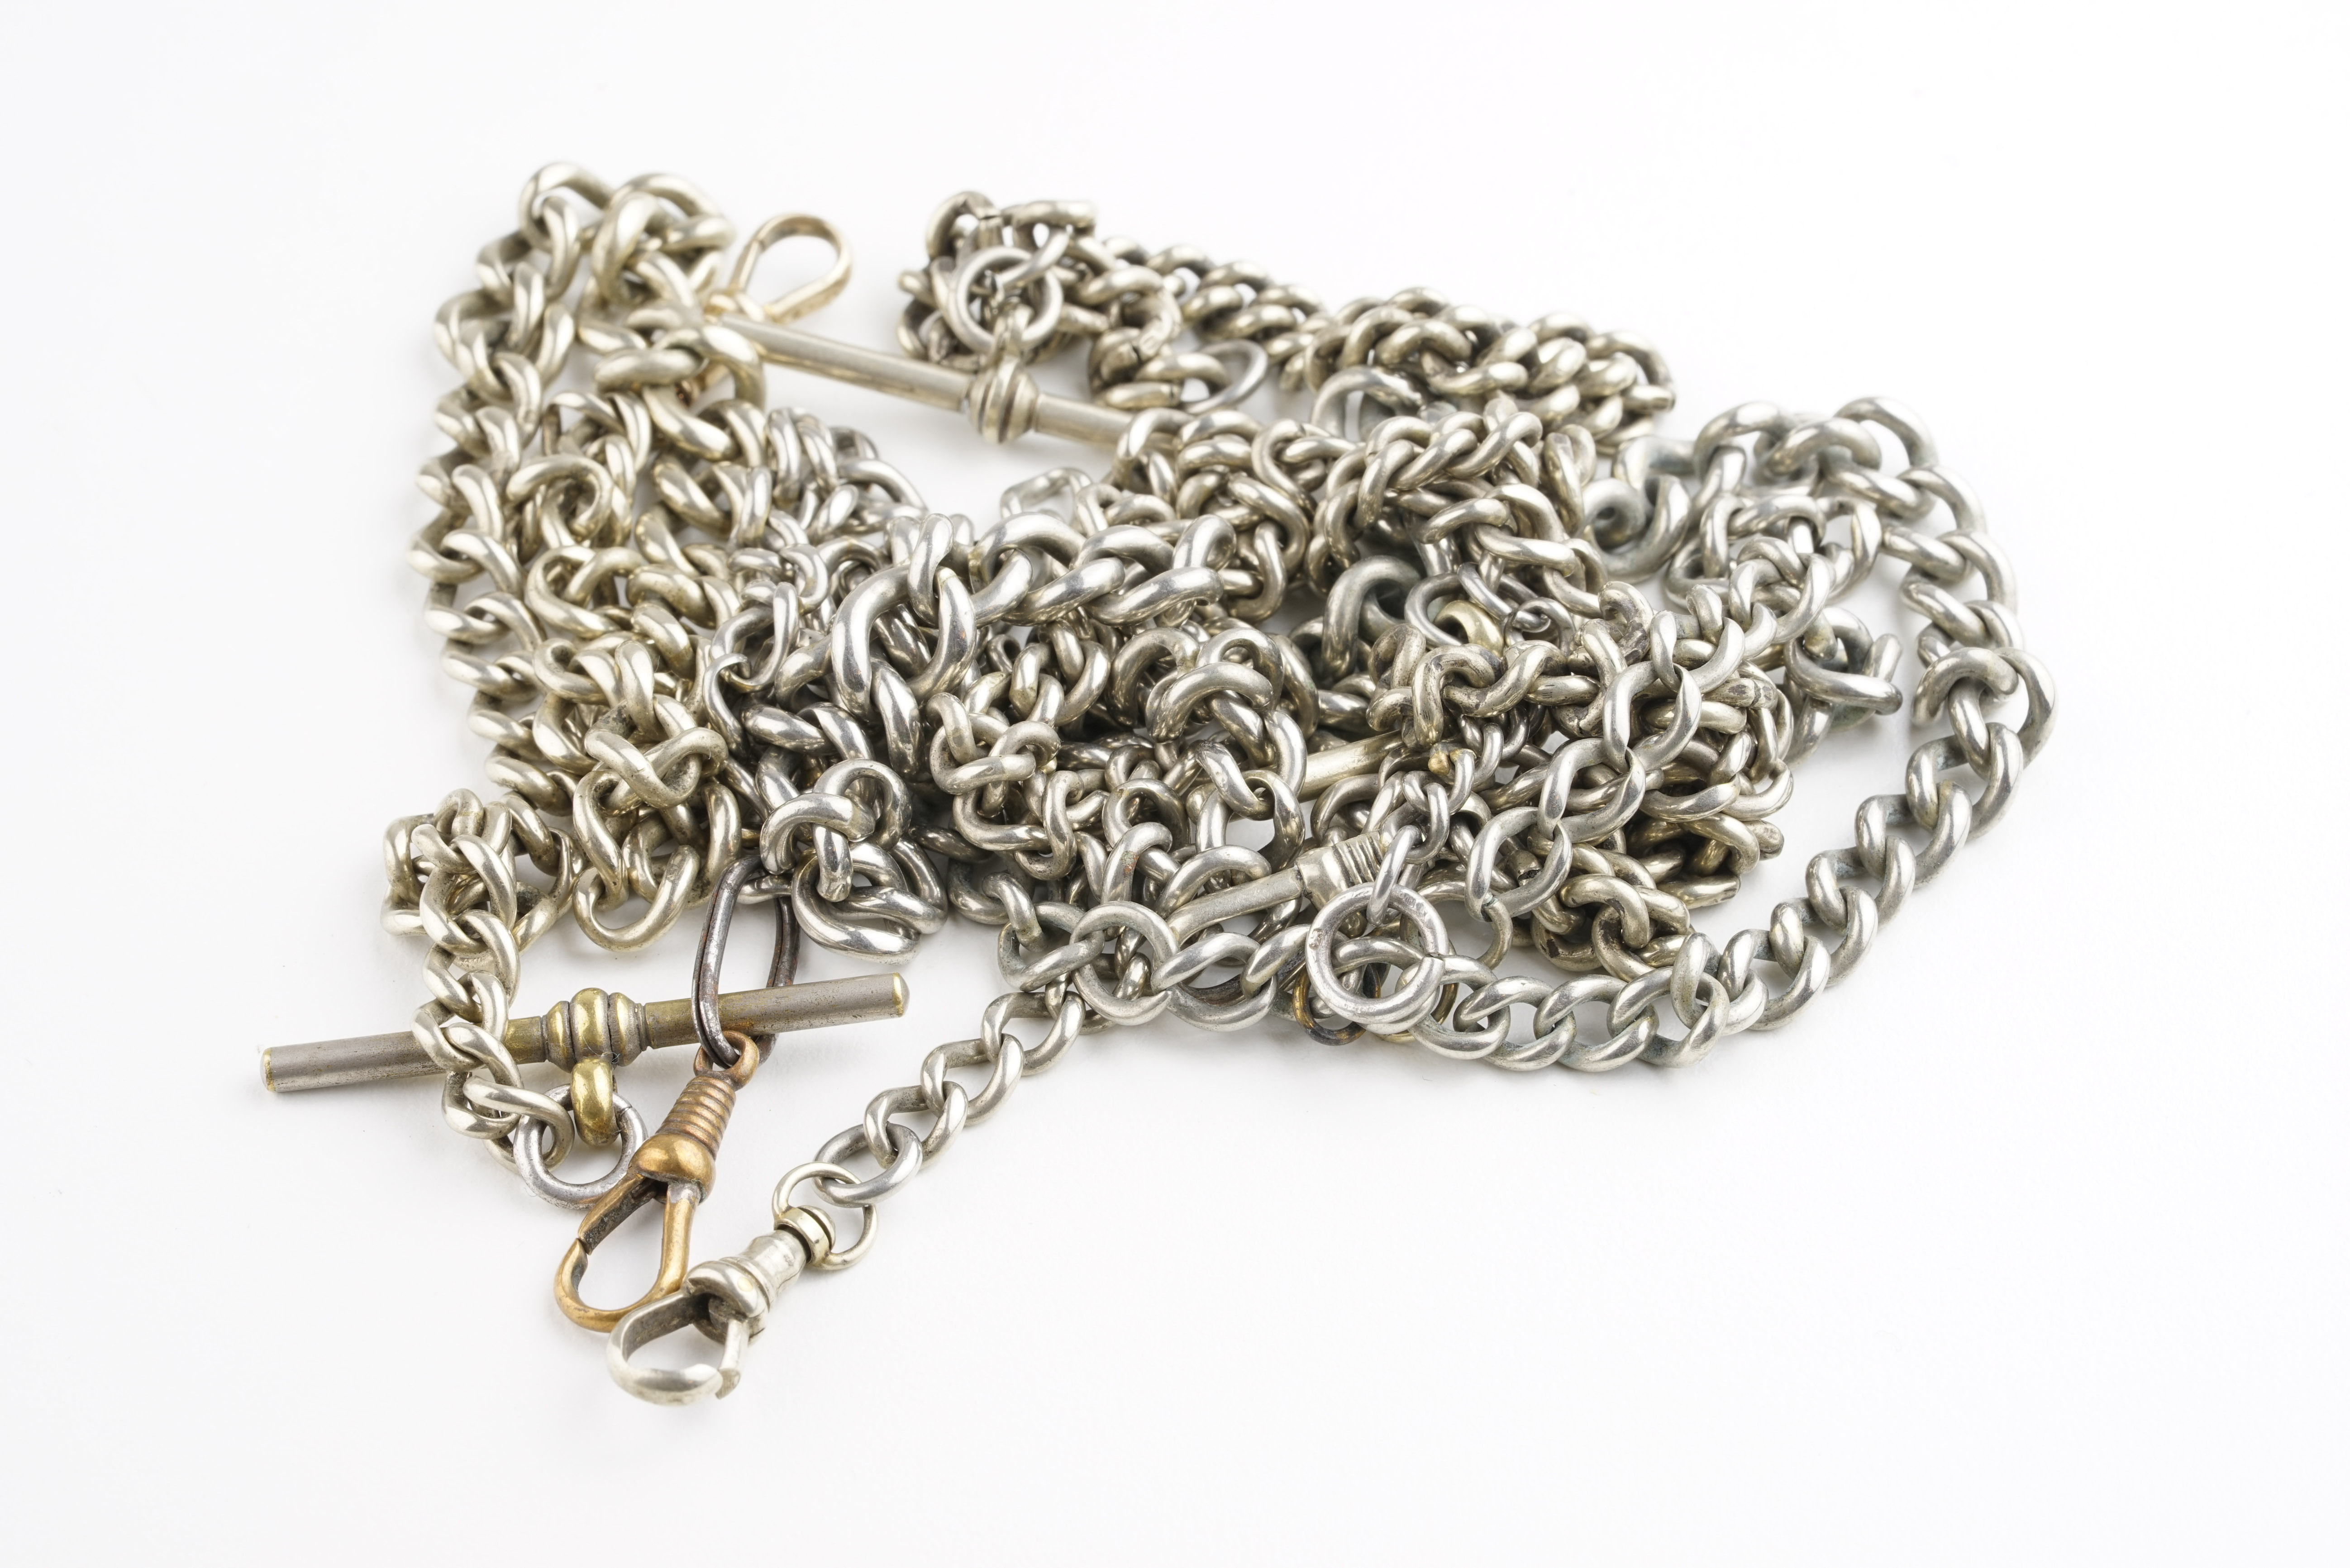 GROUP OF 5 ALBERT CHAINS, group of 5 white metal albert chains, untested, gross weight 124.58g.***